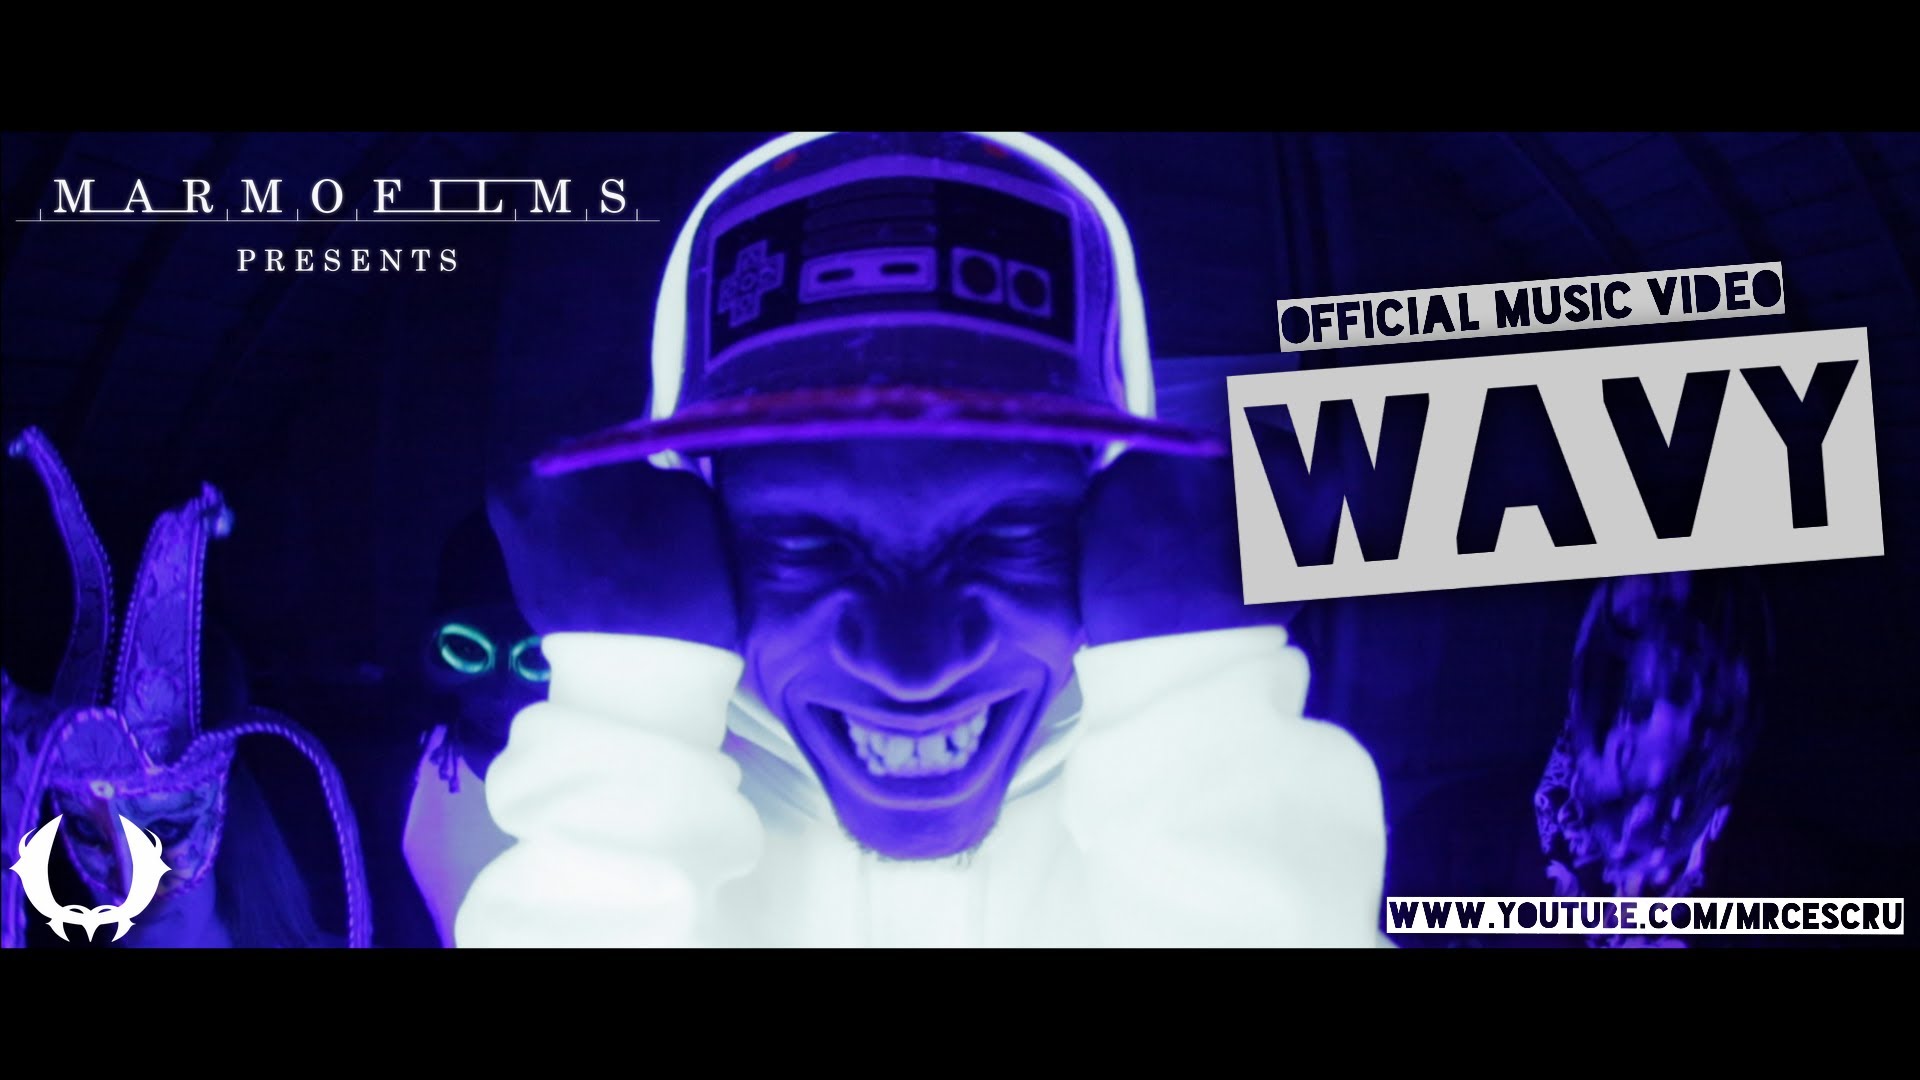 Godemis Of Ces Cru Wavy Official Video Faygoluvers